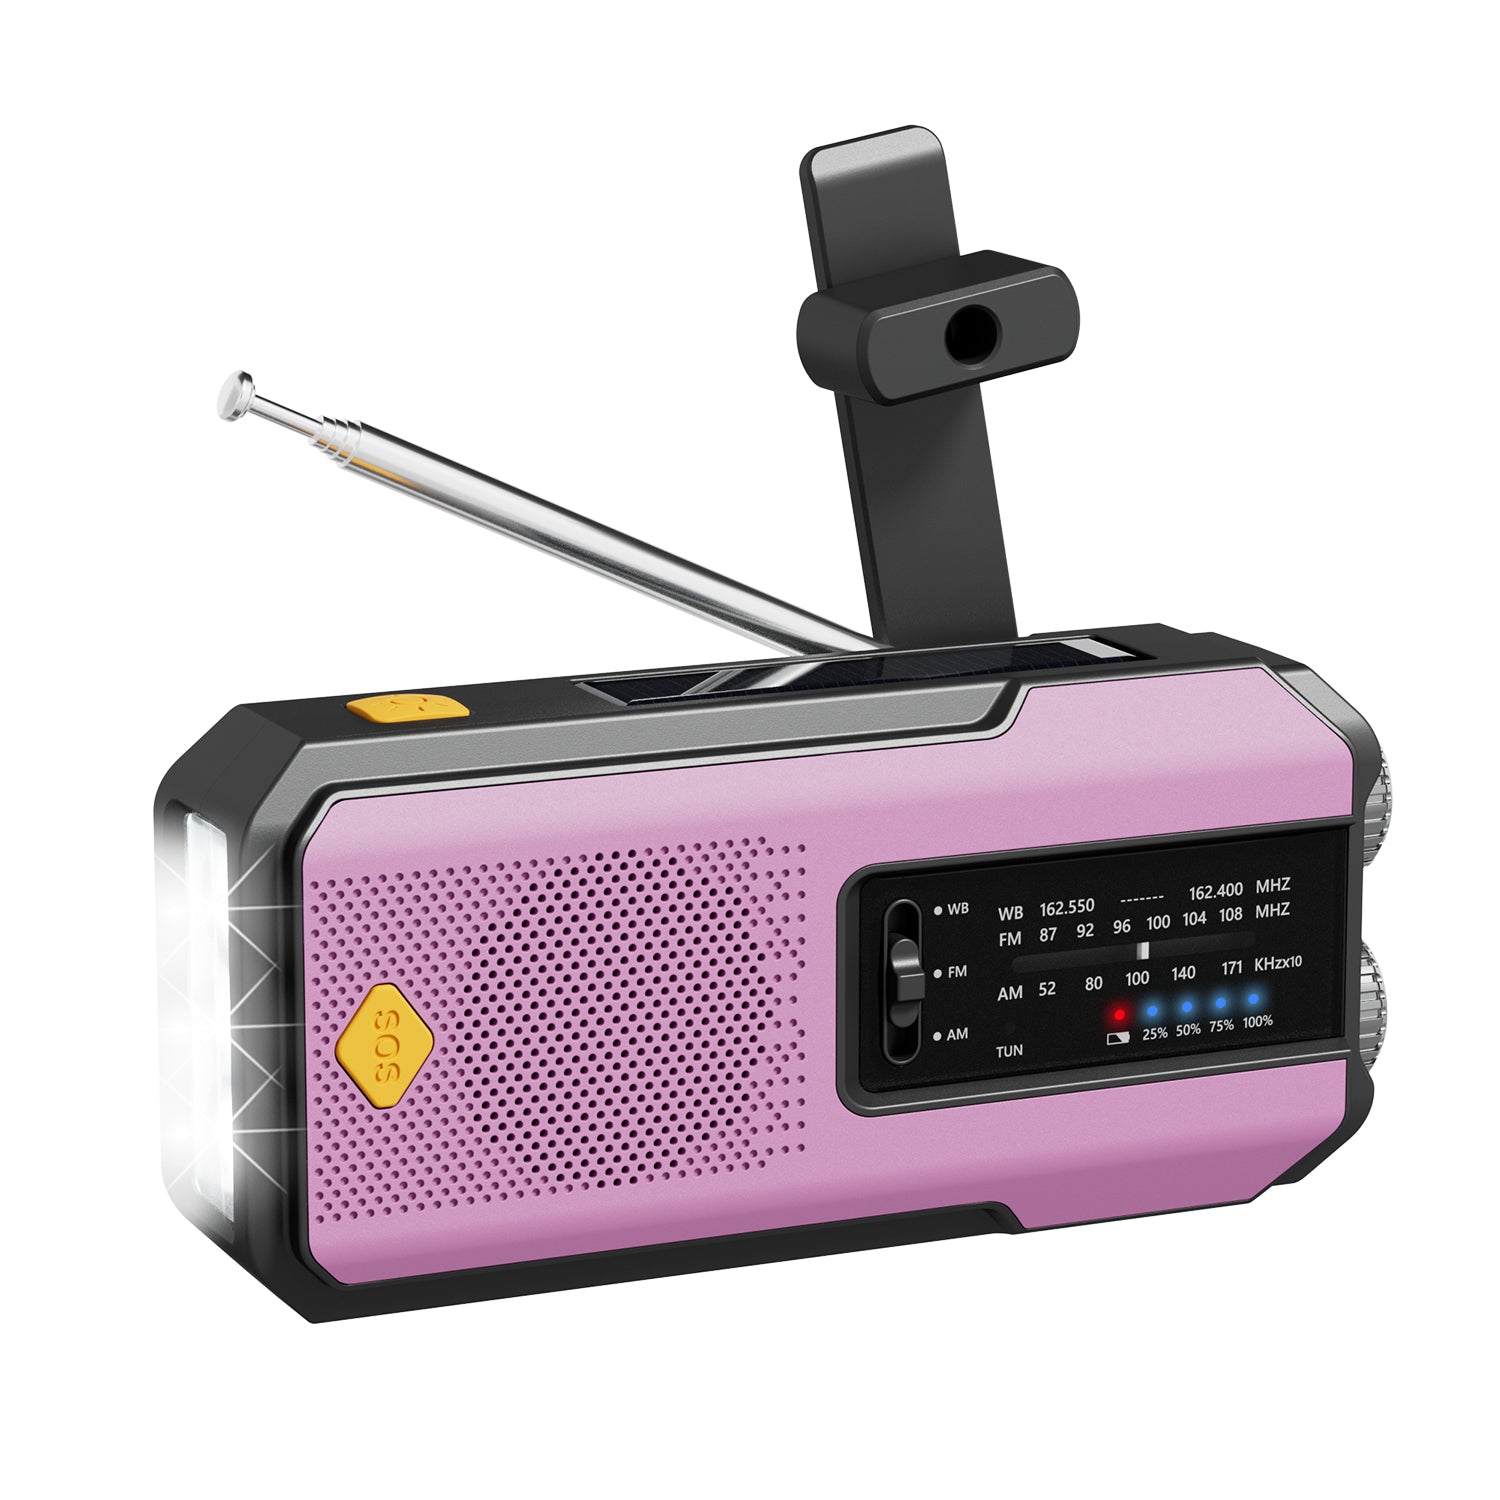 4-IN-1 Emergency Dynamo AM/FM Radio With Phone Charger